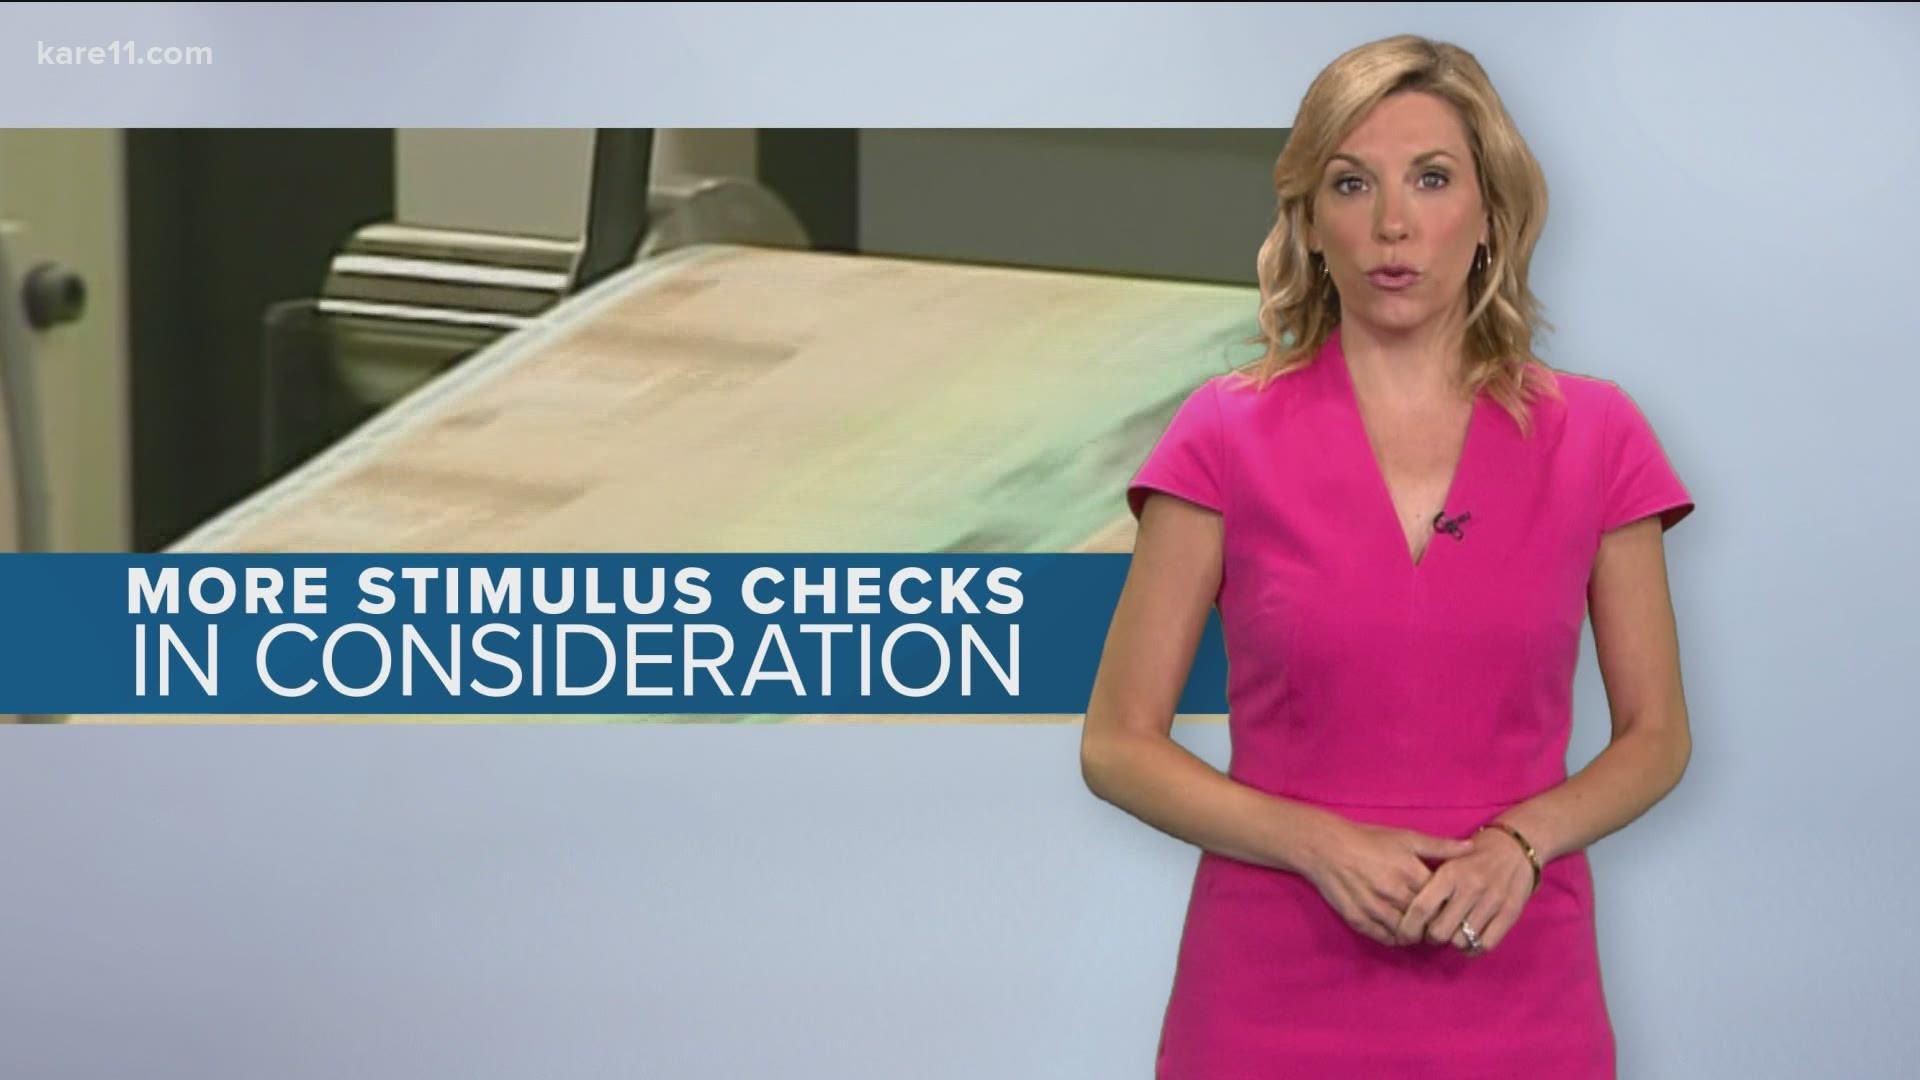 From talk of more stimulus checks to Apple's new software upgrades, Lauren Leamanczyk breaks down some of the latest headlines that impact your wallet.